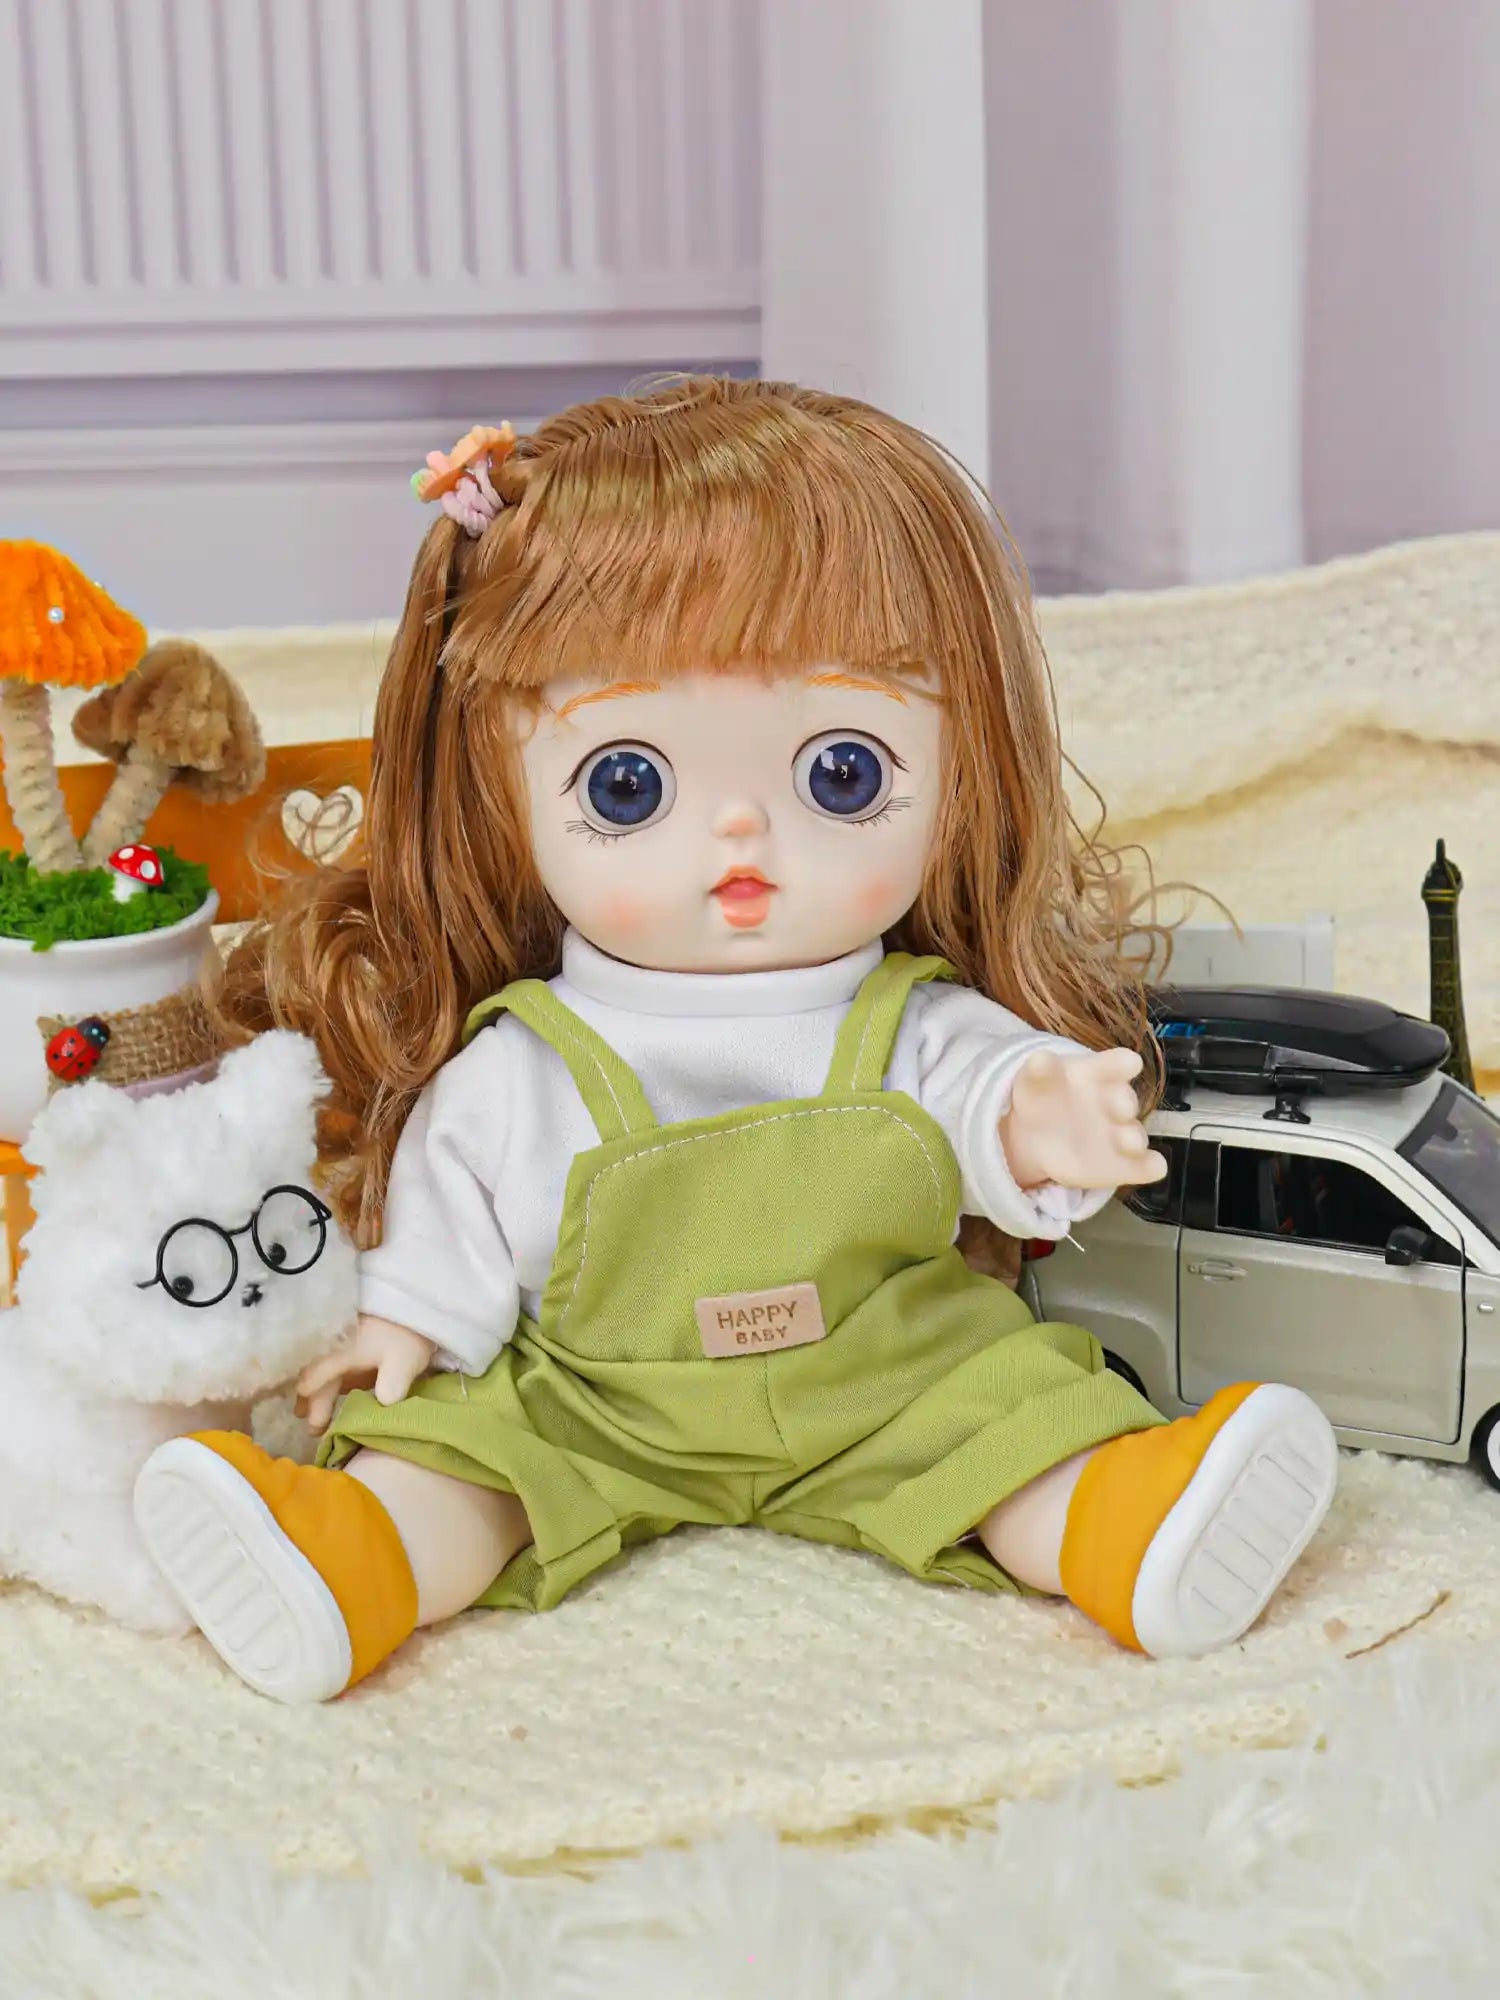 A friendly-faced doll with overalls and toy accessories, including a fluffy white cat and miniature vehicle.